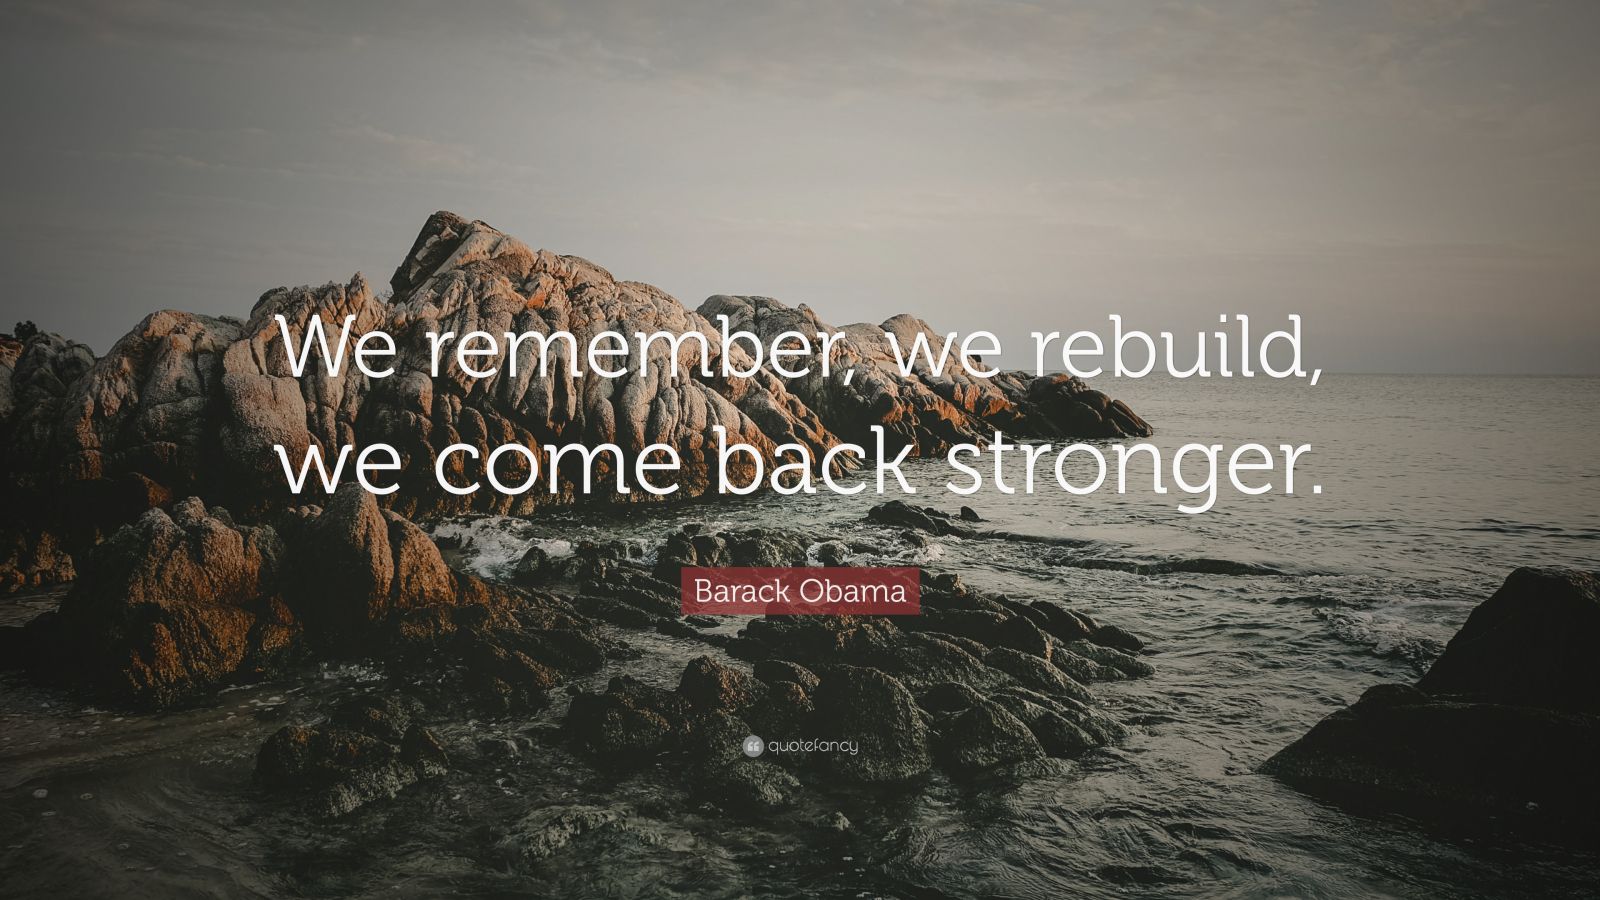 Stronger back come rebuild remember quote quotes obama barack quotefancy